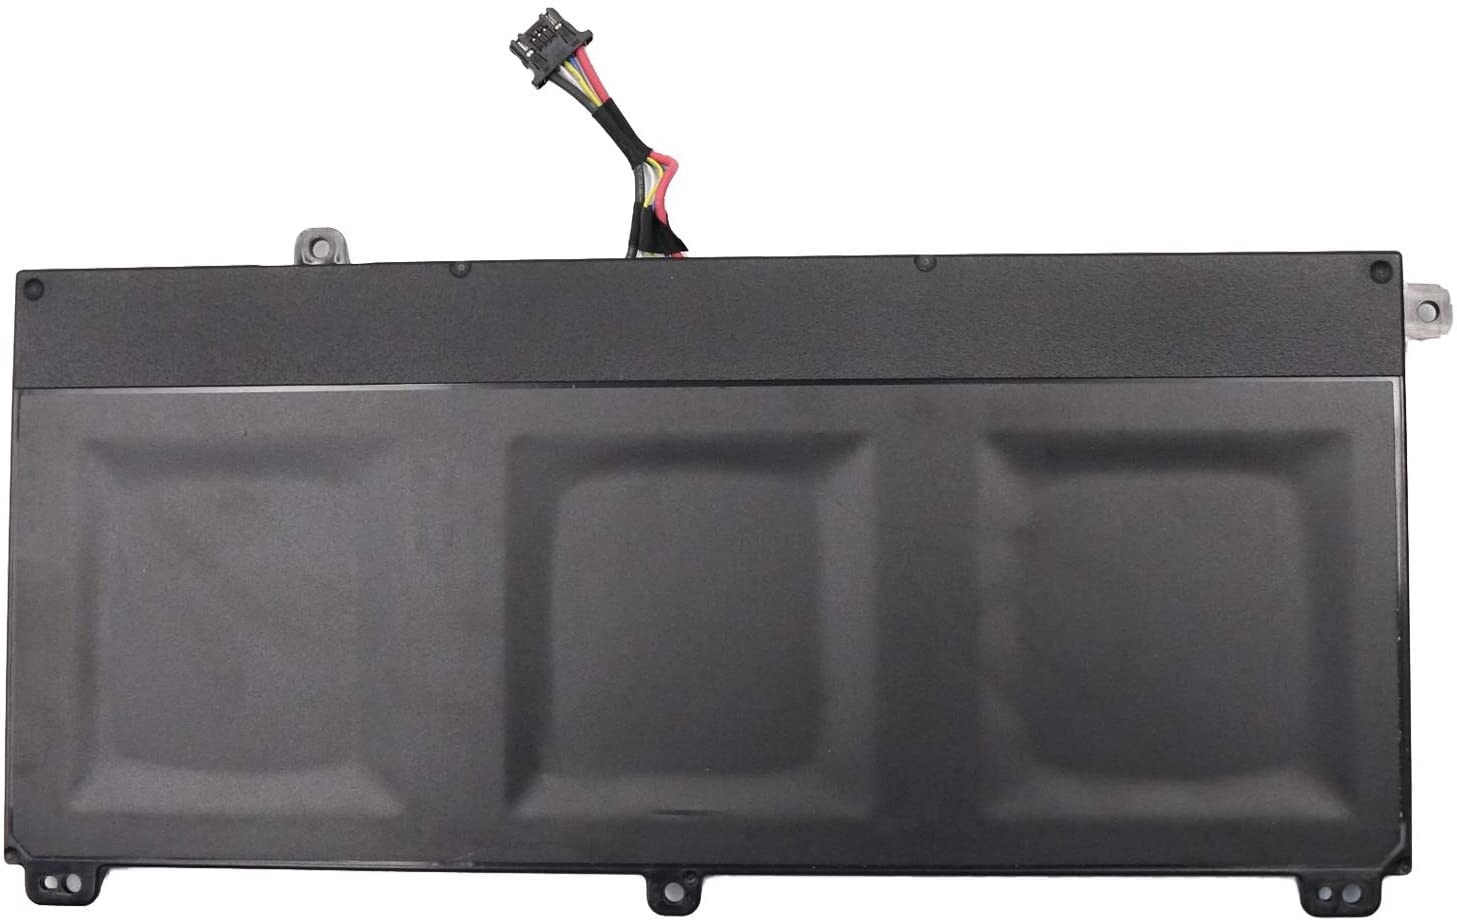 45N1742 Laptop Battery Compatible with Lenovo ThinkPad T550 T550s T560 W550 W550s P50S Series Notebook 45N1740 45N1741 45N1743 SB10K12721 00NY639 11.4V 44Wh 3900mAhâ€¦